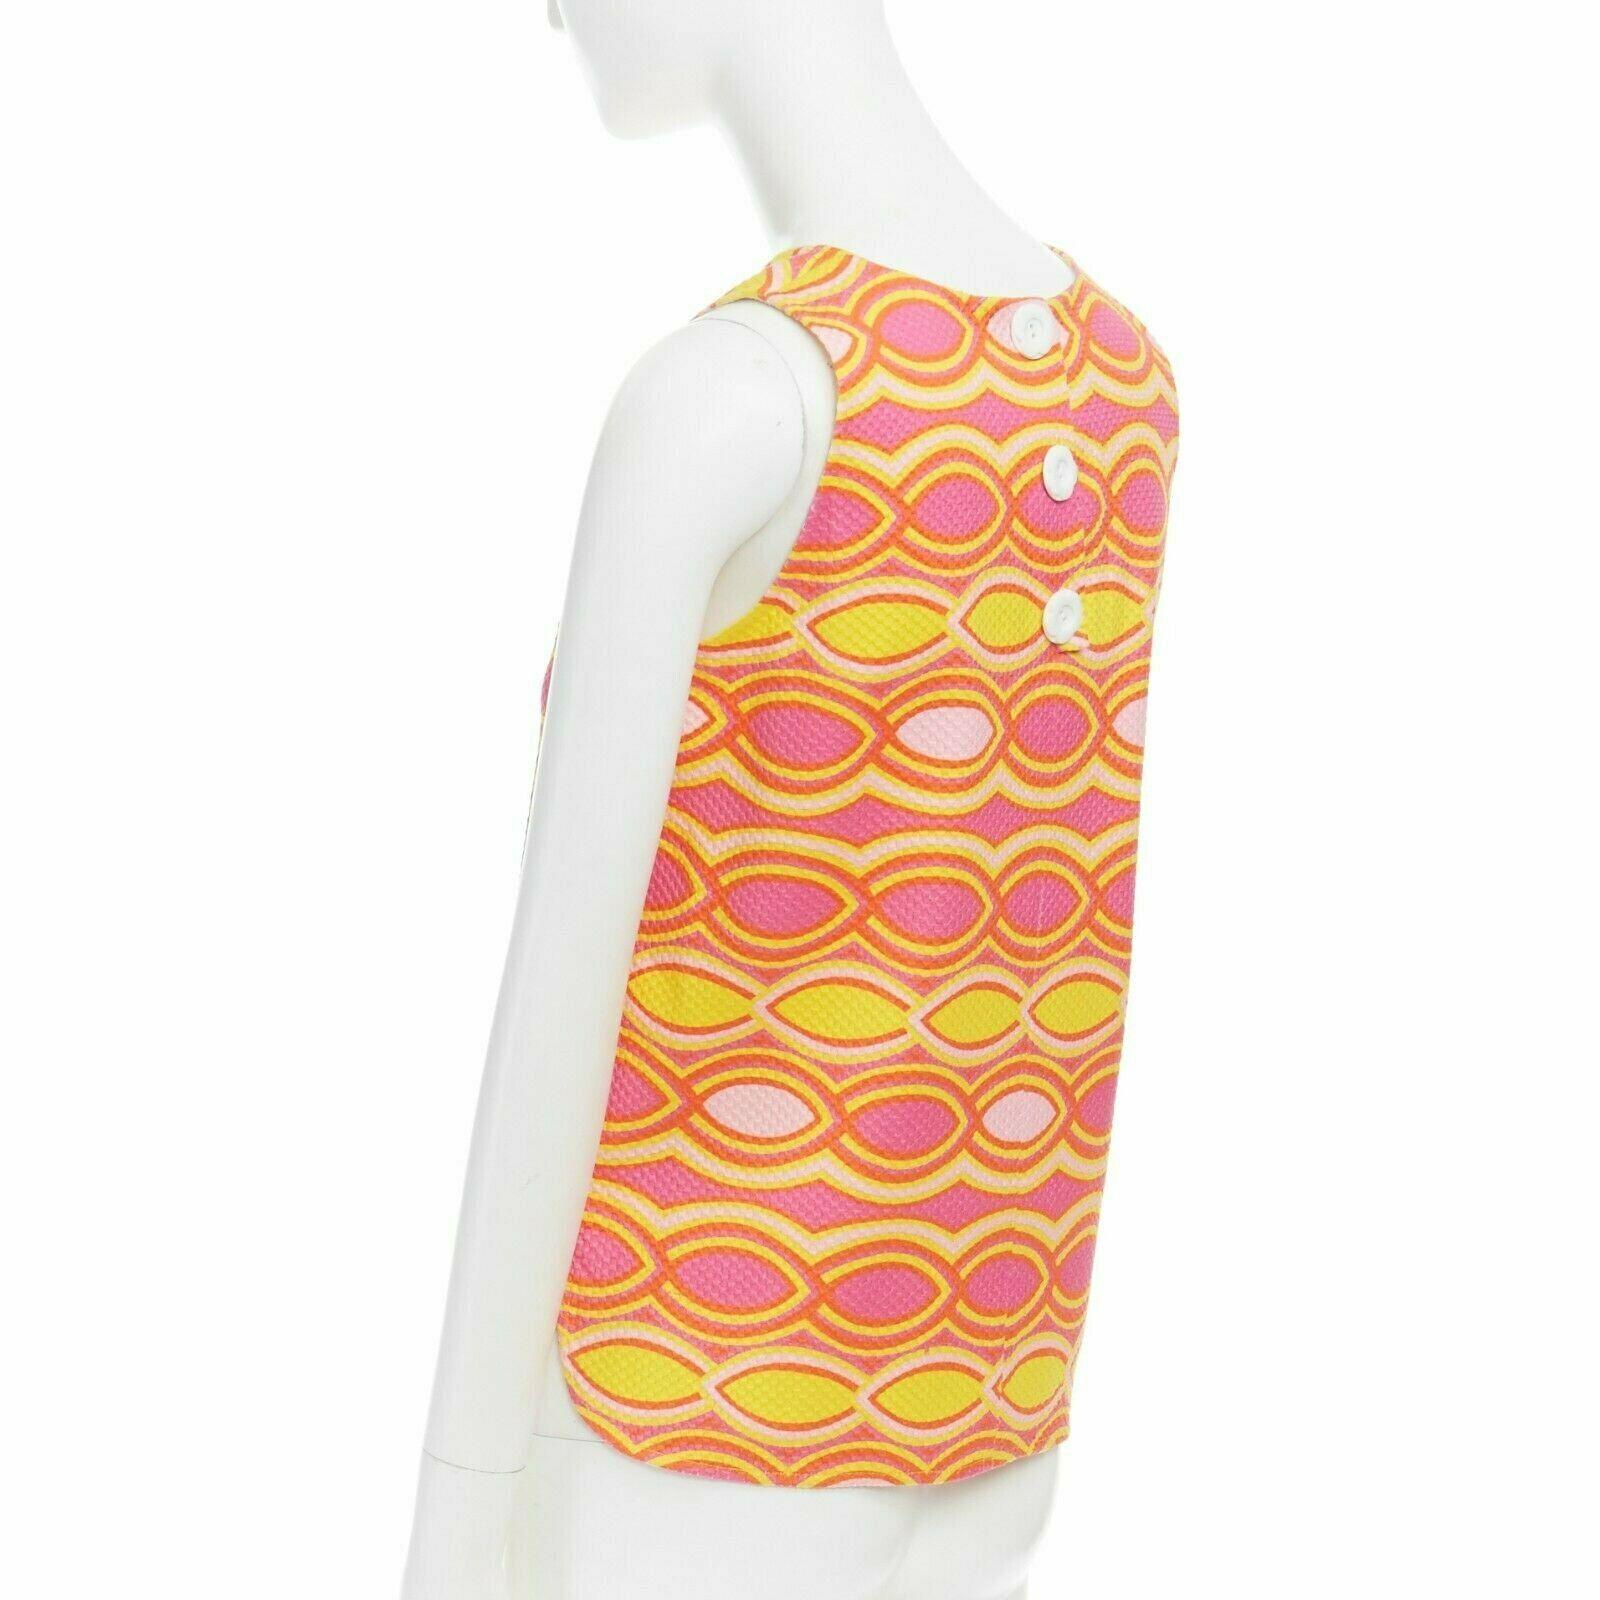 Women's LISA PERRY 60s mod con pink yellow geometric print textured cotton top US2 UK6 S